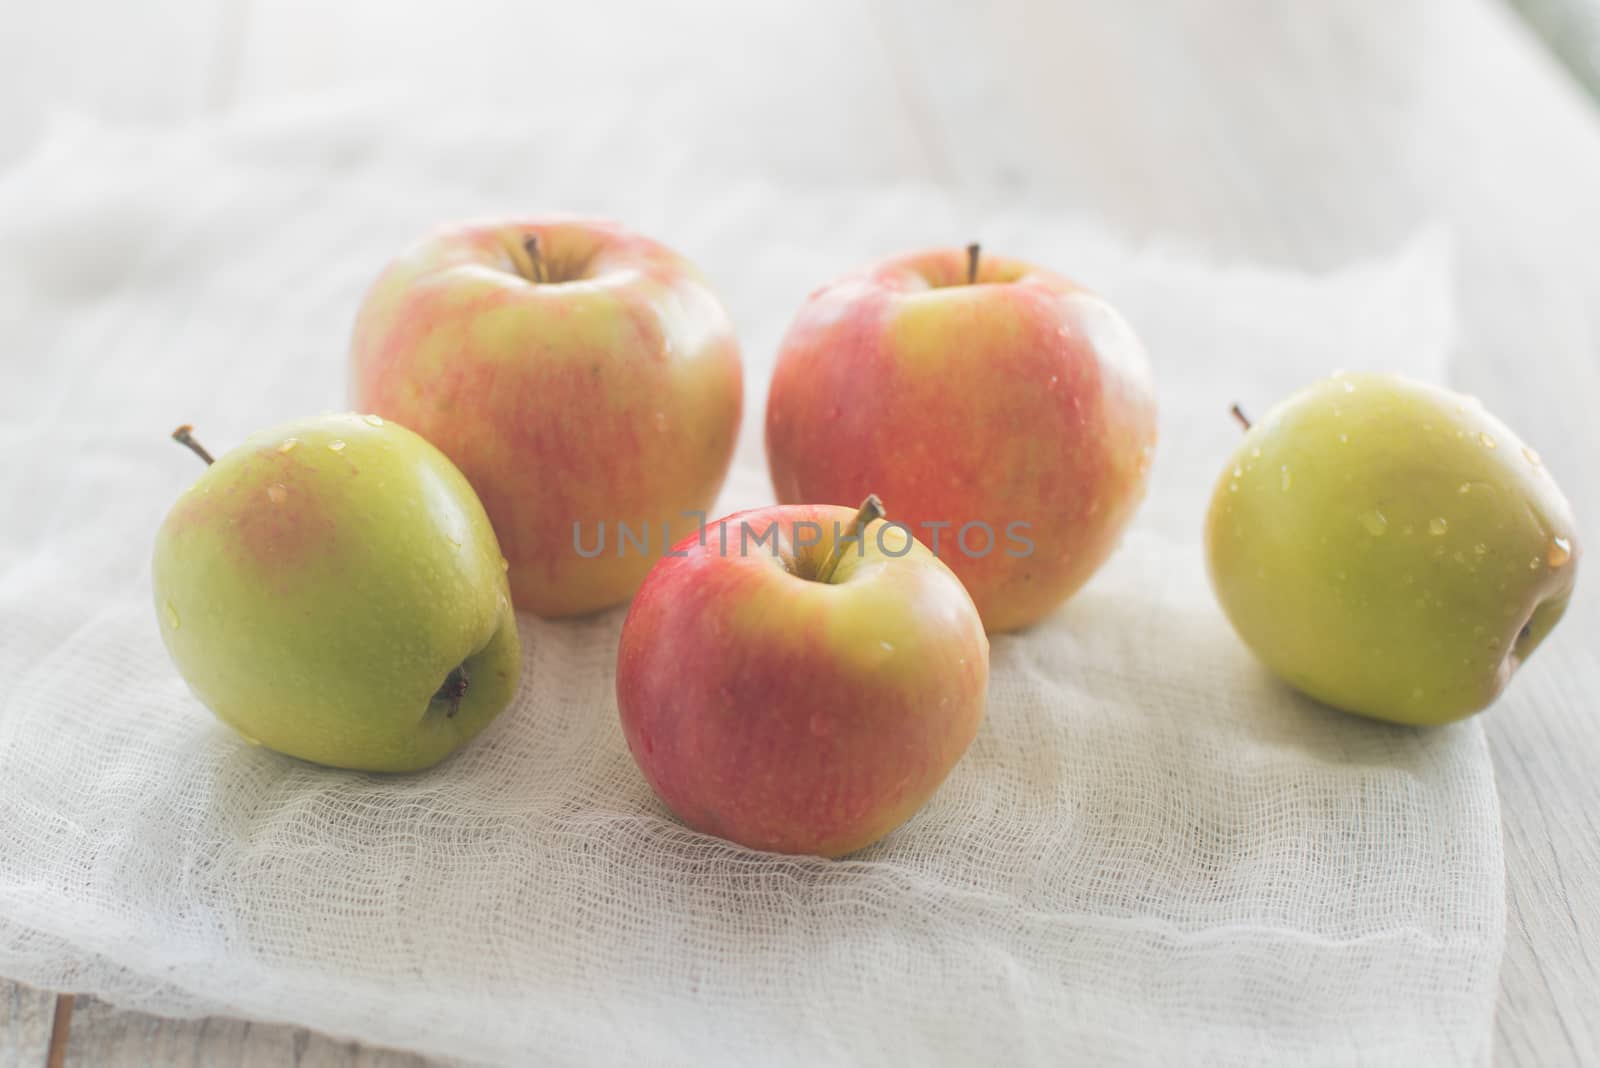 Five apples lay on the white textile